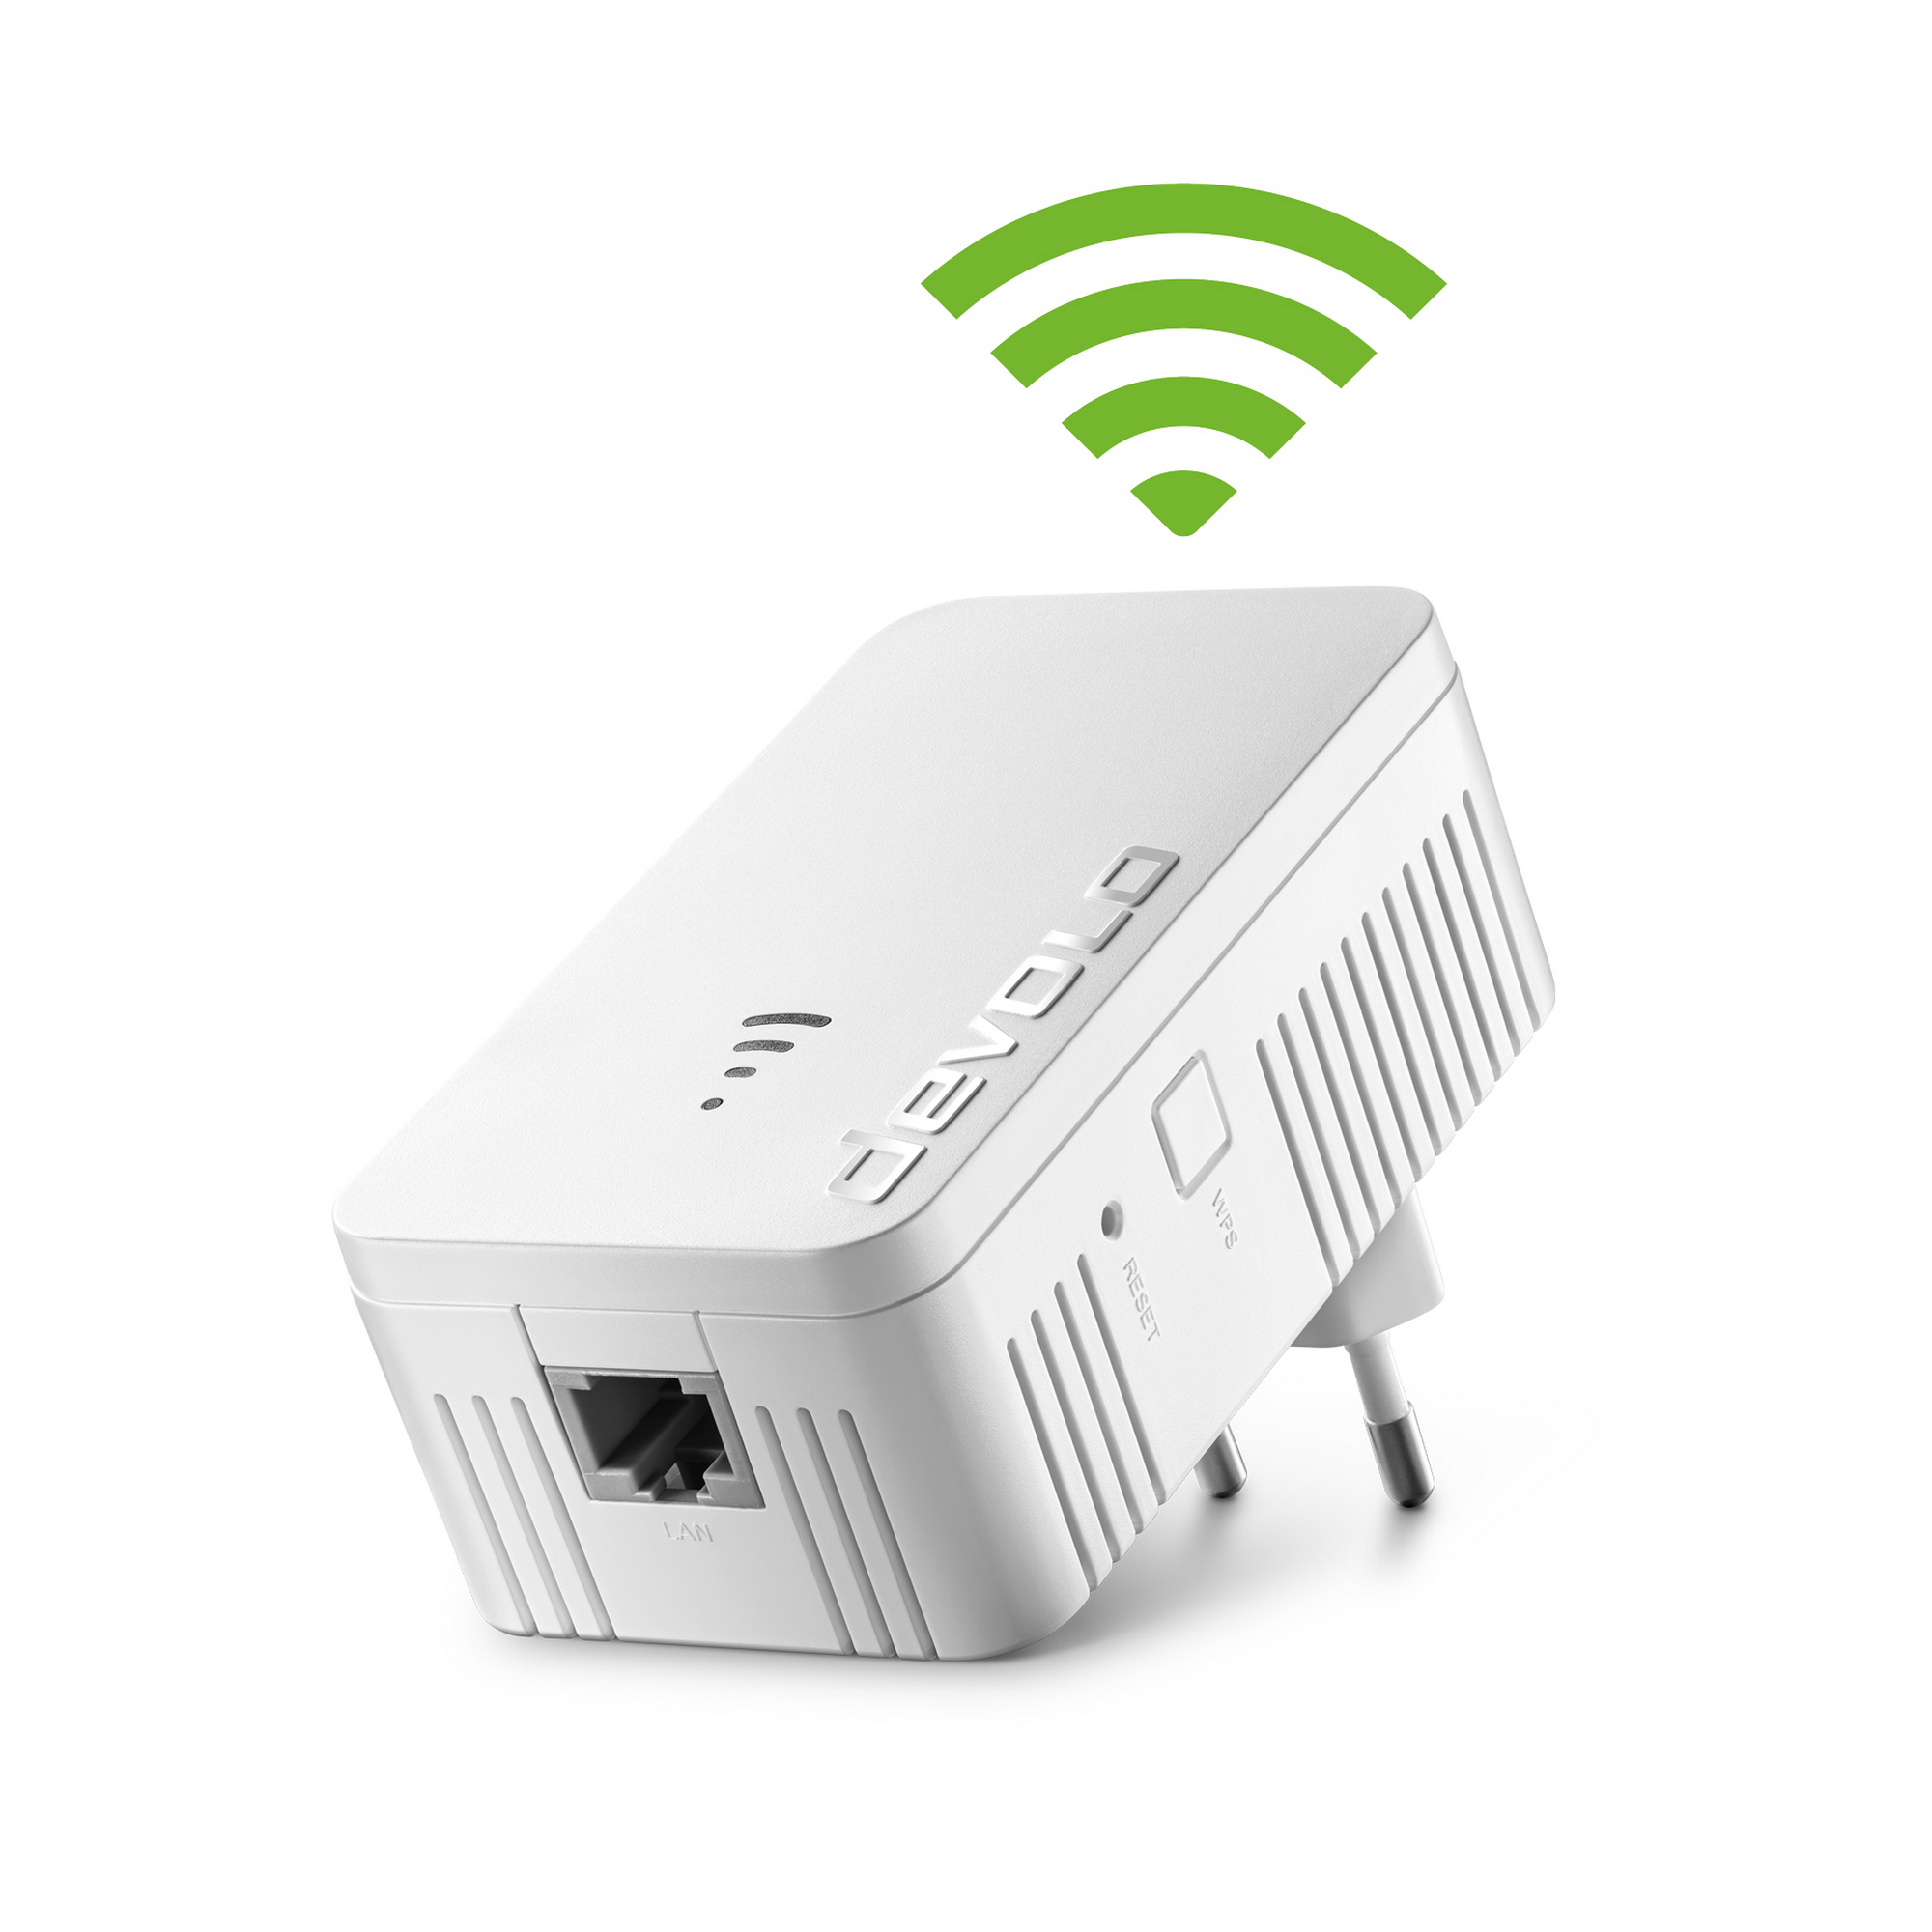 WLAN-Repeater 'Repeater 1200' WiFi 5 2,4/5 GHz 1200 Mbit/s + product picture